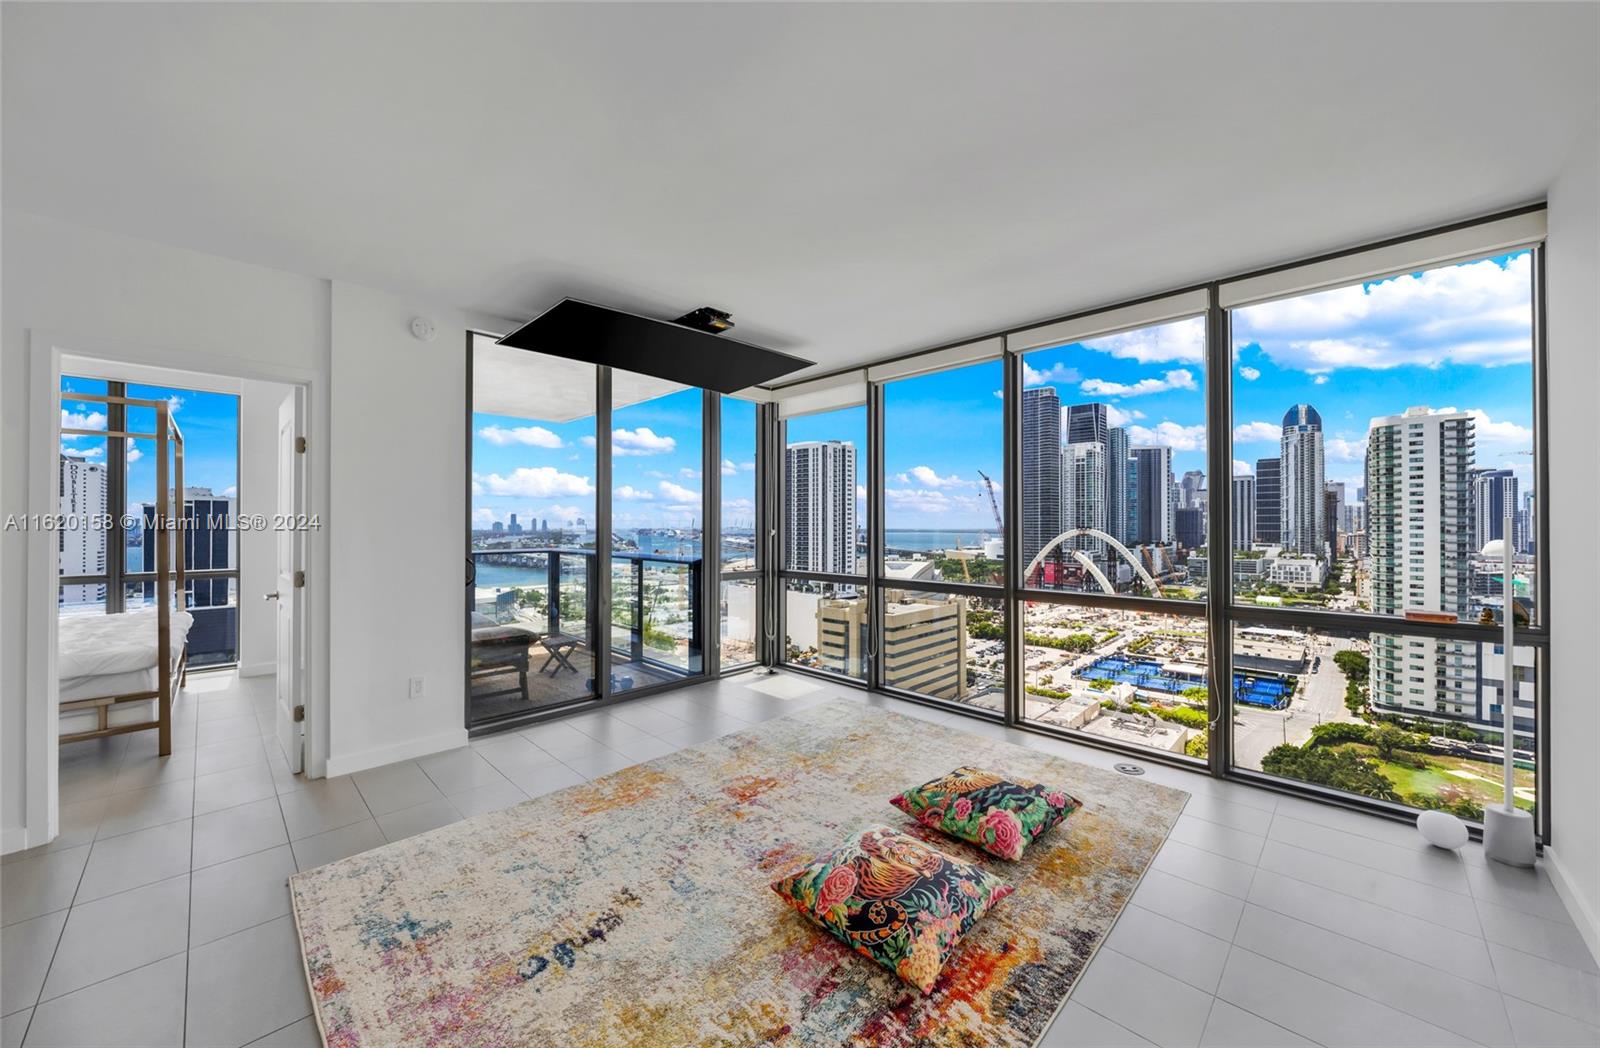 Hidden Gem! Stunning Skyline & Water Views! Must See. Available for 3-6 months or a 1-year lease!

Beautifully furnished 2-bed, 2-bath unit in the desirable 06 line—the best line in the building! Includes 1 Parking space and 1 Valet. With 1,040 sq. feet of living space, it features 9-foot high ceilings, walk-in closets, impact windows, and an expansive terrace with direct access from the primary bedroom with en-suite. Floor-to-ceiling windows provide breathtaking views of the water and downtown cityscape. Amazing sunrise and sunset views from every room. 

Rent includes everything except electricity. The building boasts 30,000 sqft of amenities, inc. 3 pools, jacuzzi & sauna. Minutes away from the Airport, Wynwood, South Beach, Brickell, Shops, and Museums